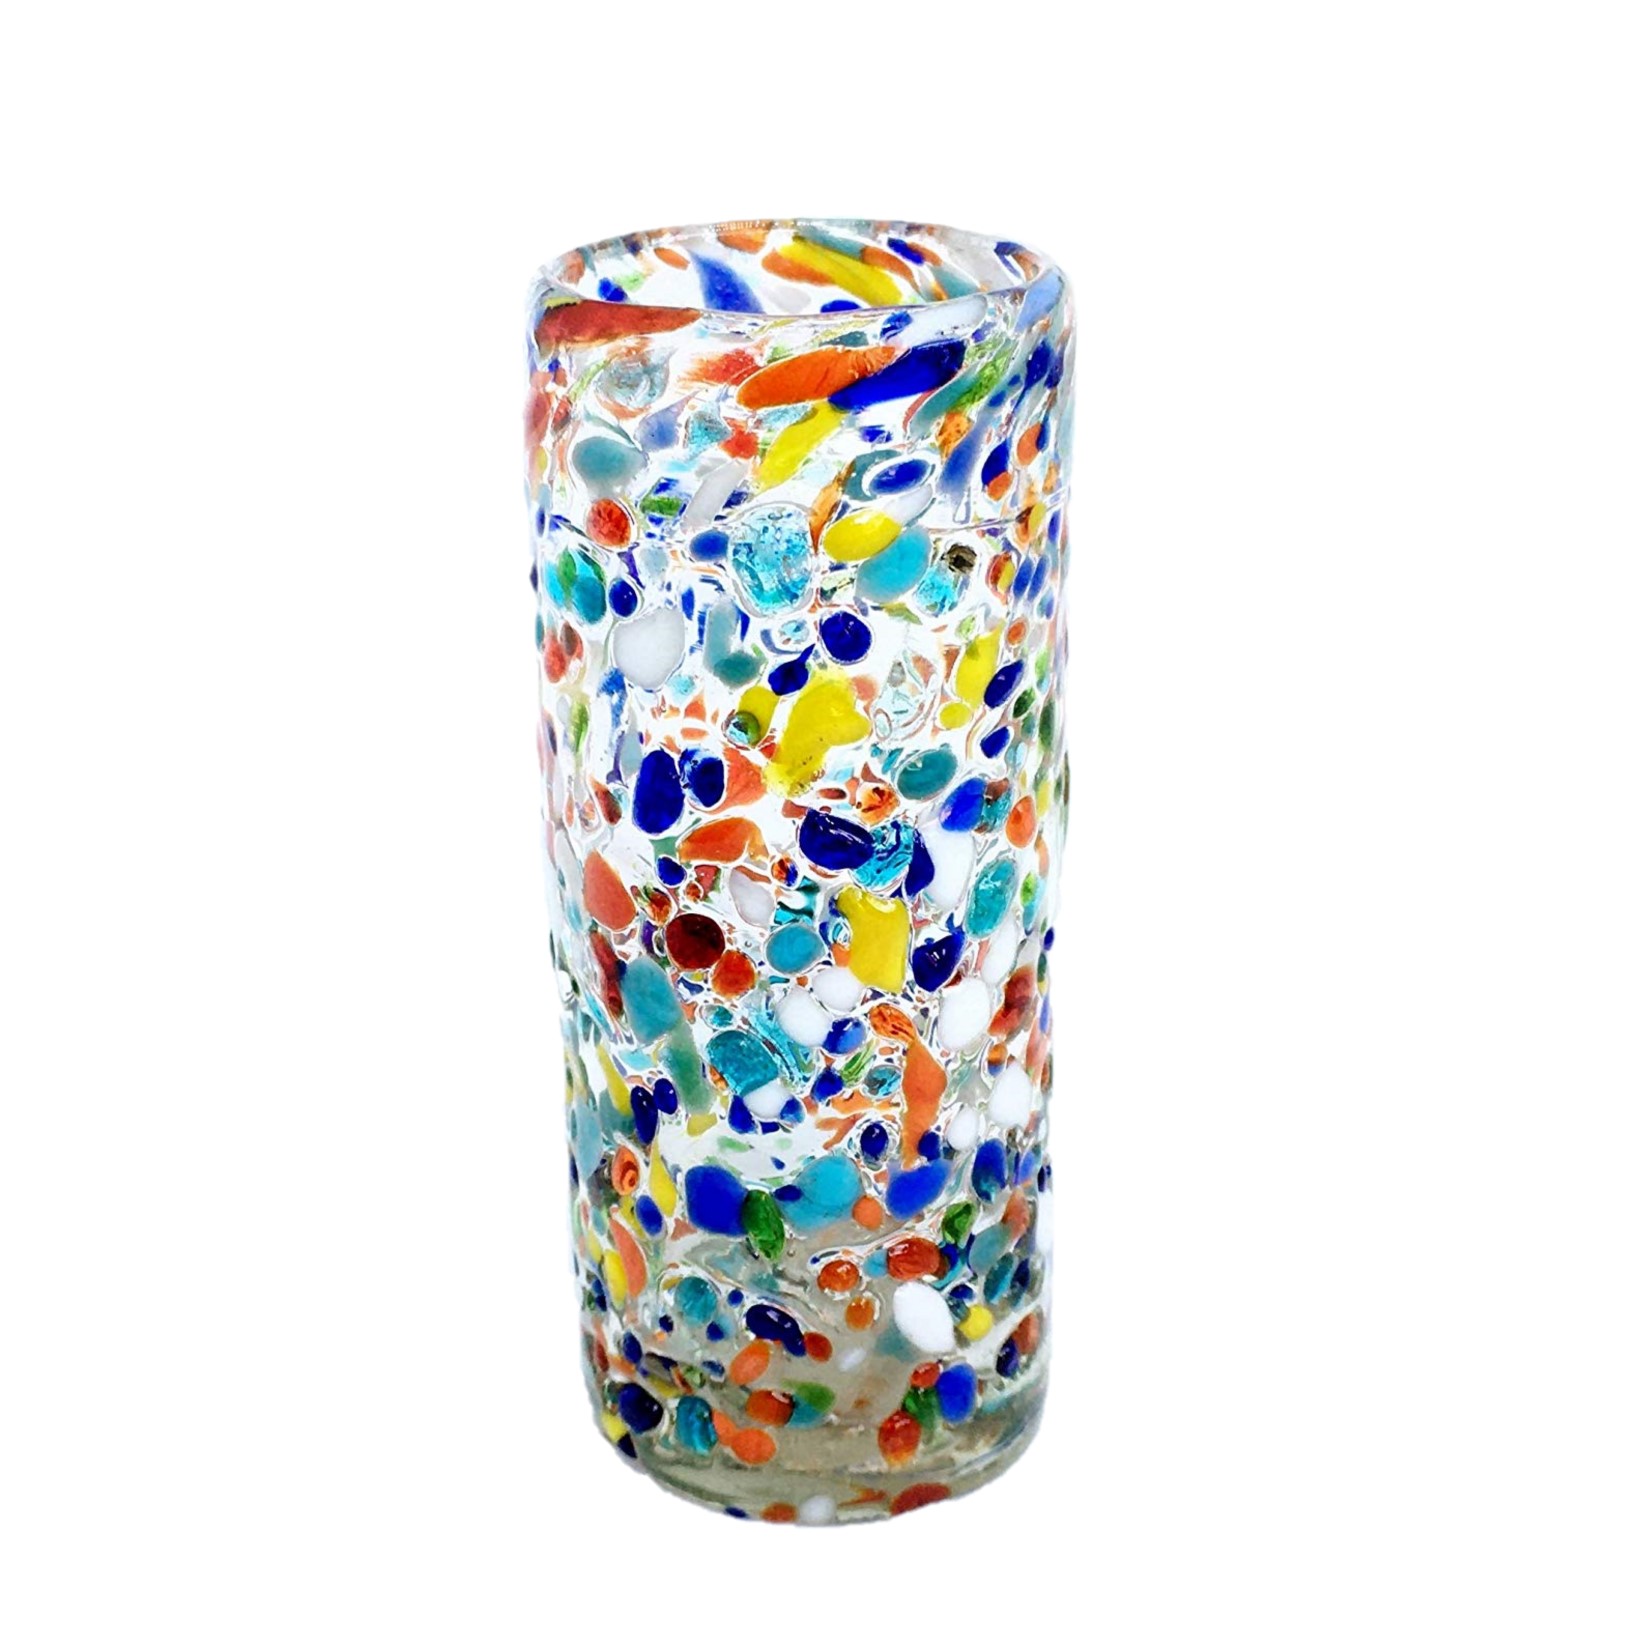 Tequila Shot Glasses / Confetti Rocks 2 oz Tequila Shot Glasses (set of 6) / Sip your favorite Tequila or Mezcal with these iconic Confetti Rocks shot glasses, which are a must-have of any bar. Crafted one by one by skilled artisans in Tonala, Mexico, each glass is different from the next making them unique works of art. They feature our colorful Confetti rocks design with small colored-glass rounded cristals embedded in clear glass that give them a nice feeling and grip. These shot glasses are festive and fun, making them a perfect gift for anyone. Get ready for your next fiesta!!